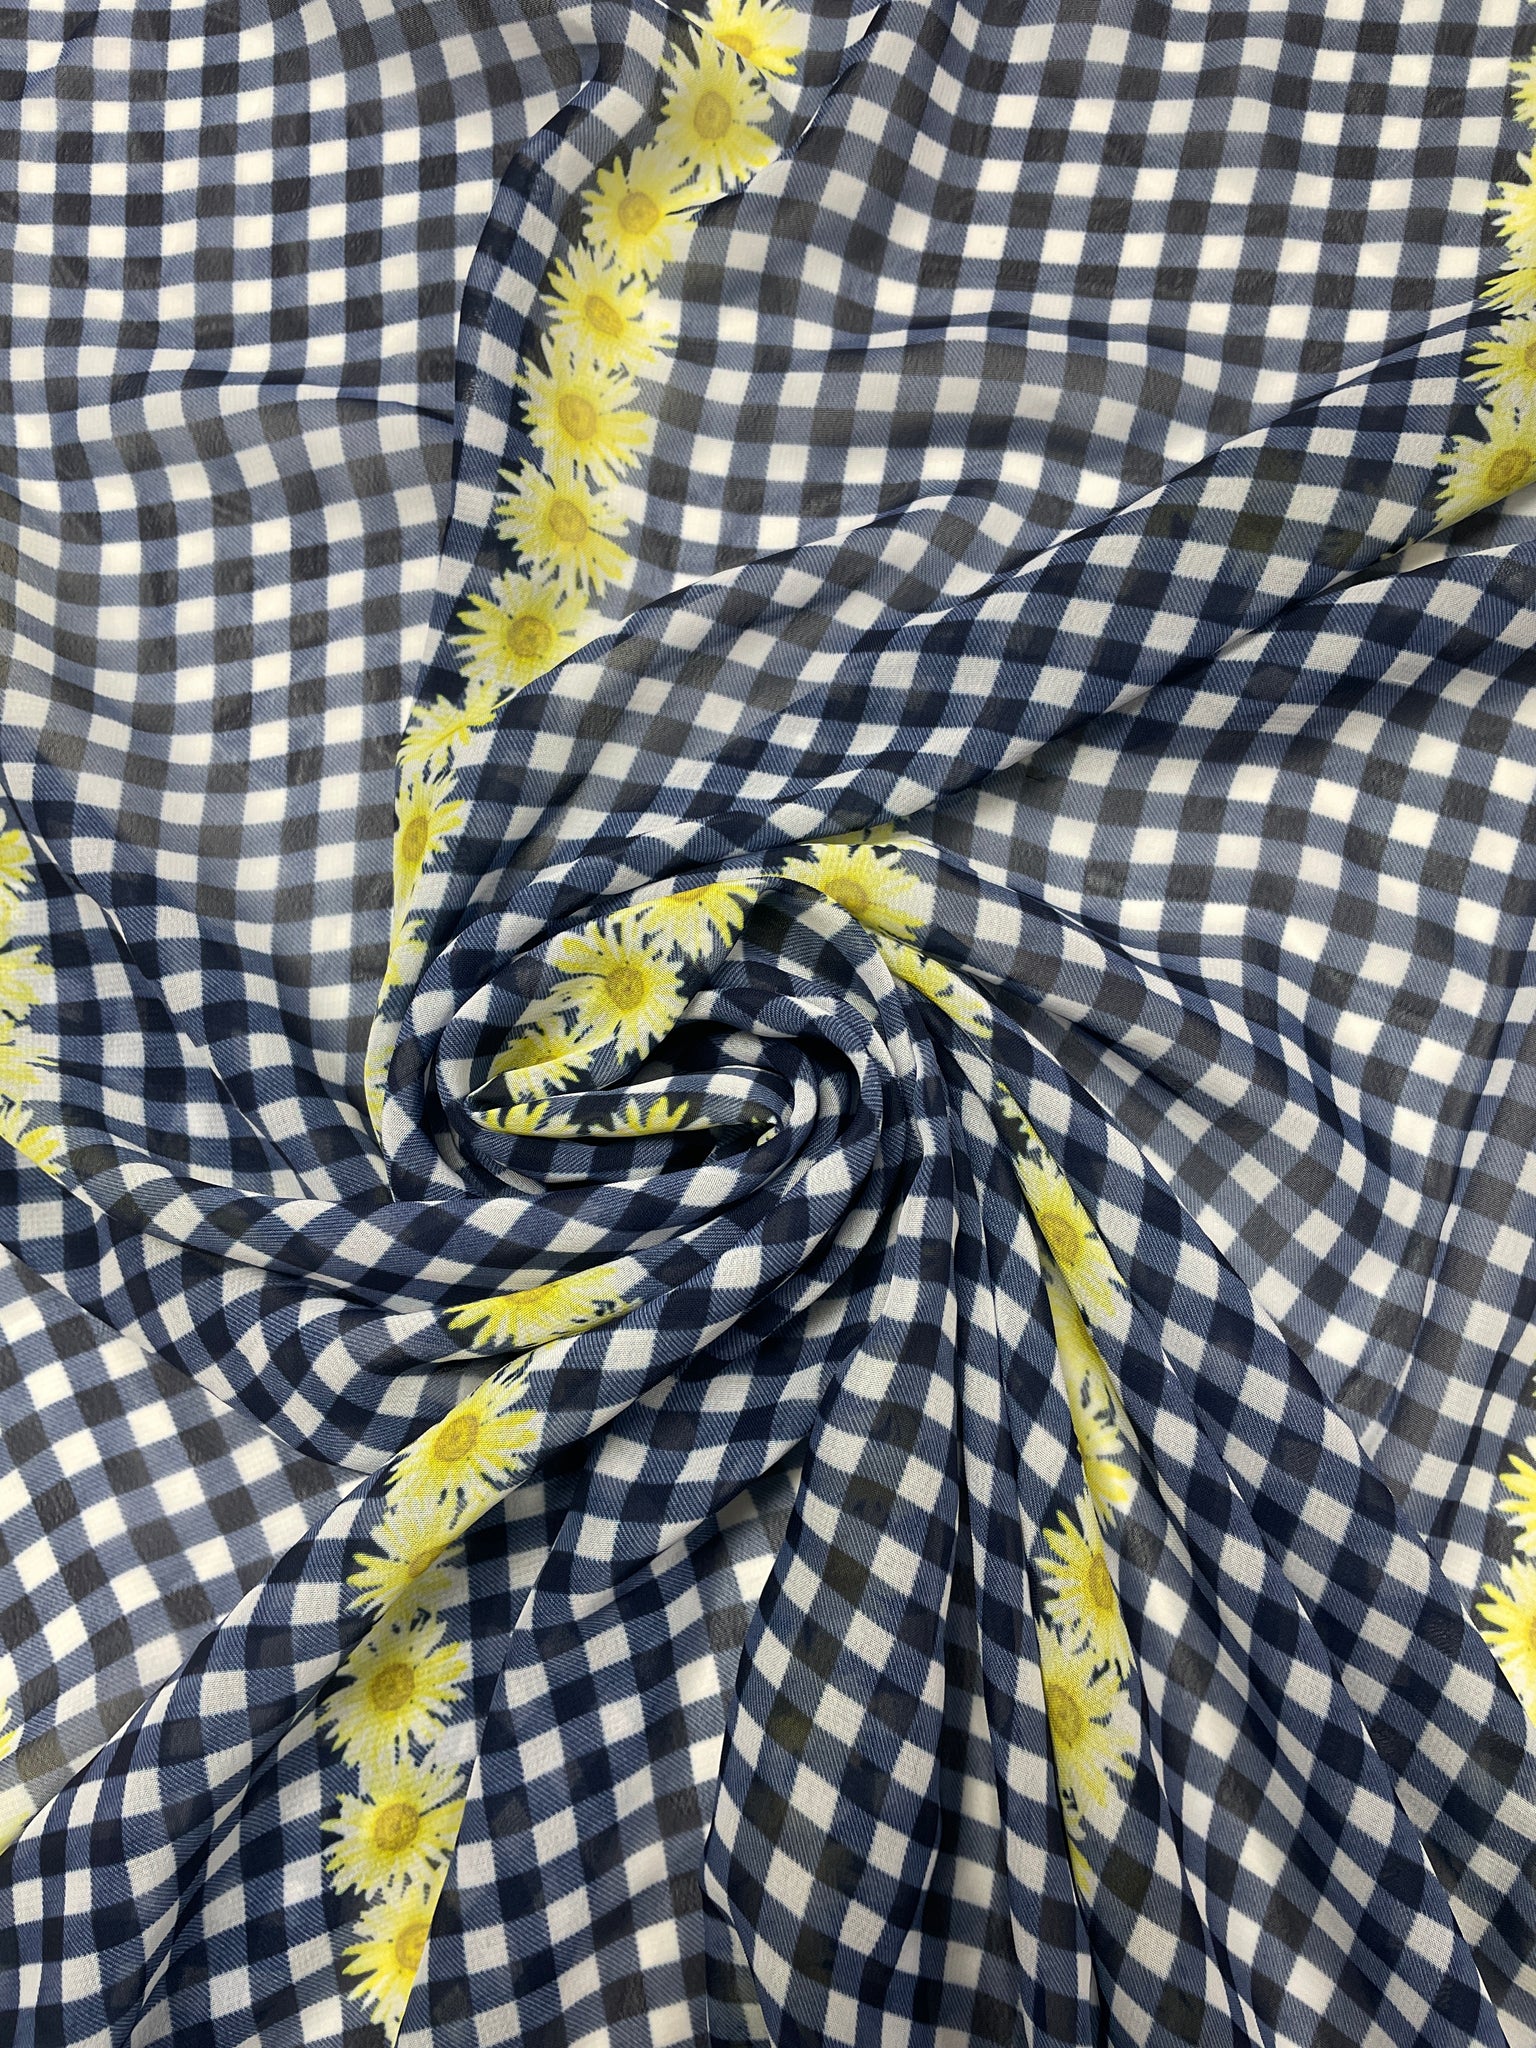 2 1/4 YD Polyester Chiffon Printed Gingham - Blue and White with Stripes of Yellow Flowers